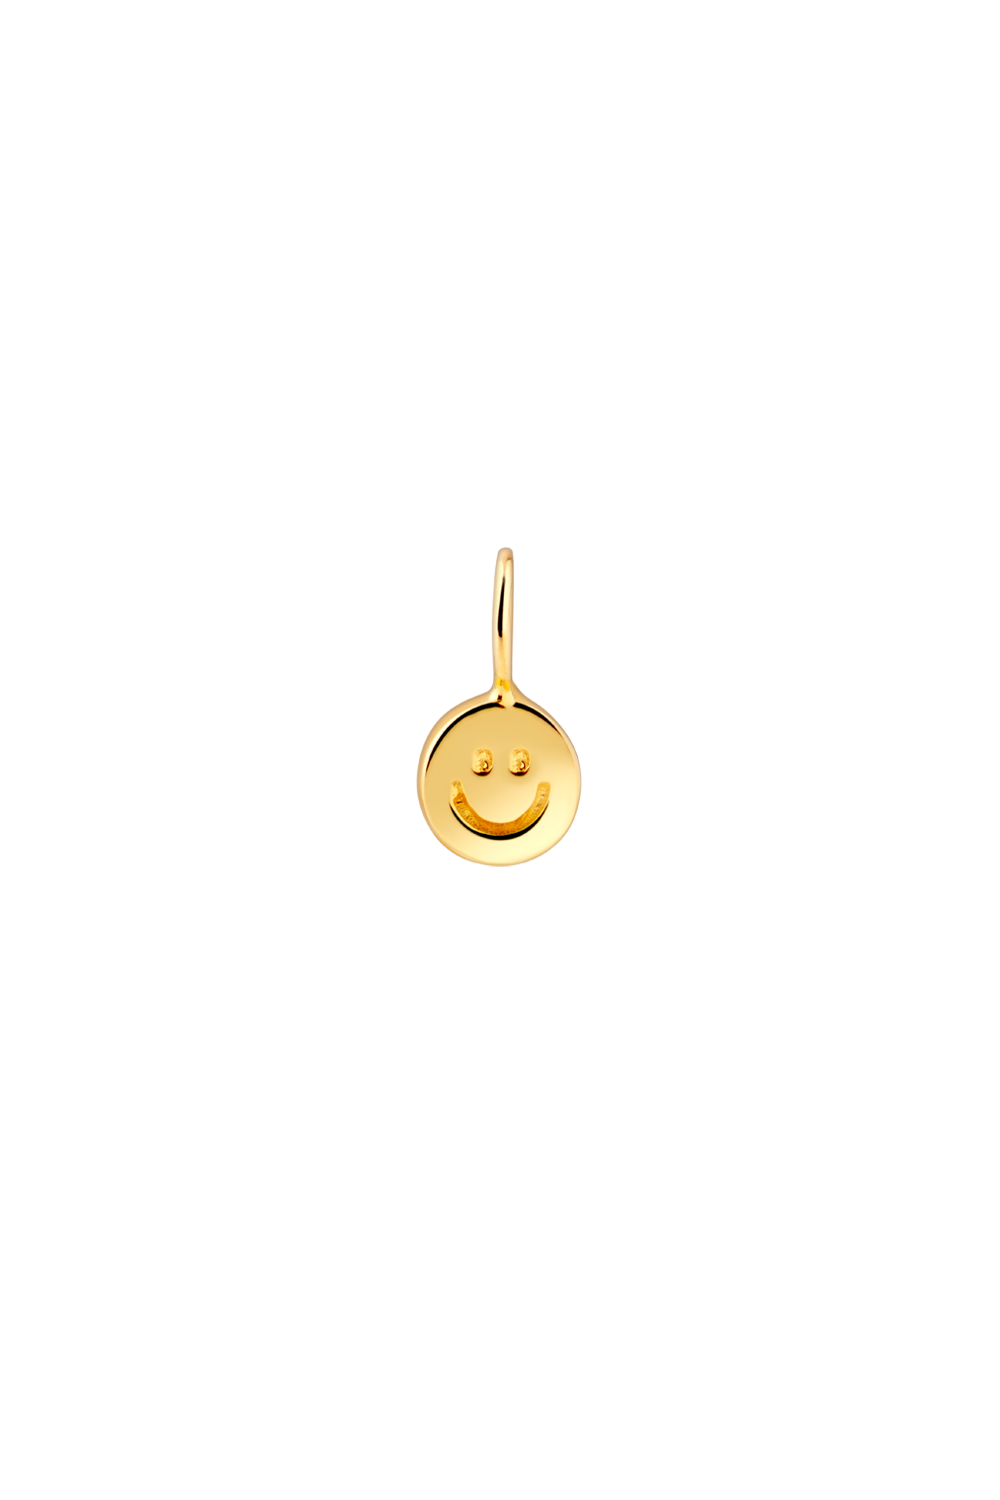 The Fine Gold Smiley Charm